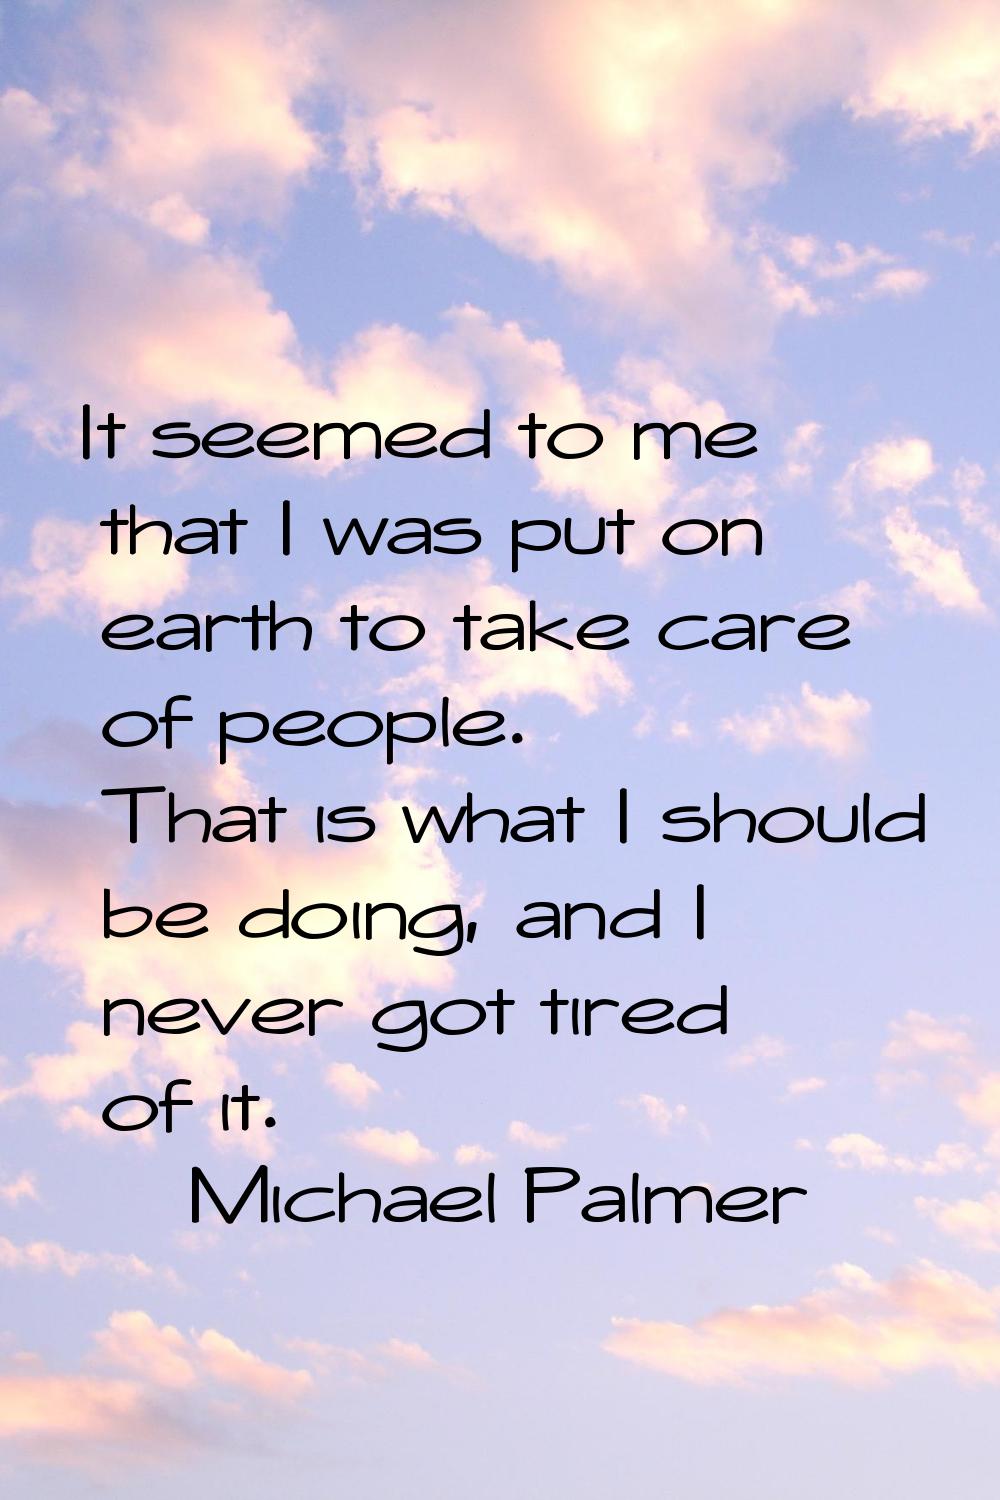 It seemed to me that I was put on earth to take care of people. That is what I should be doing, and